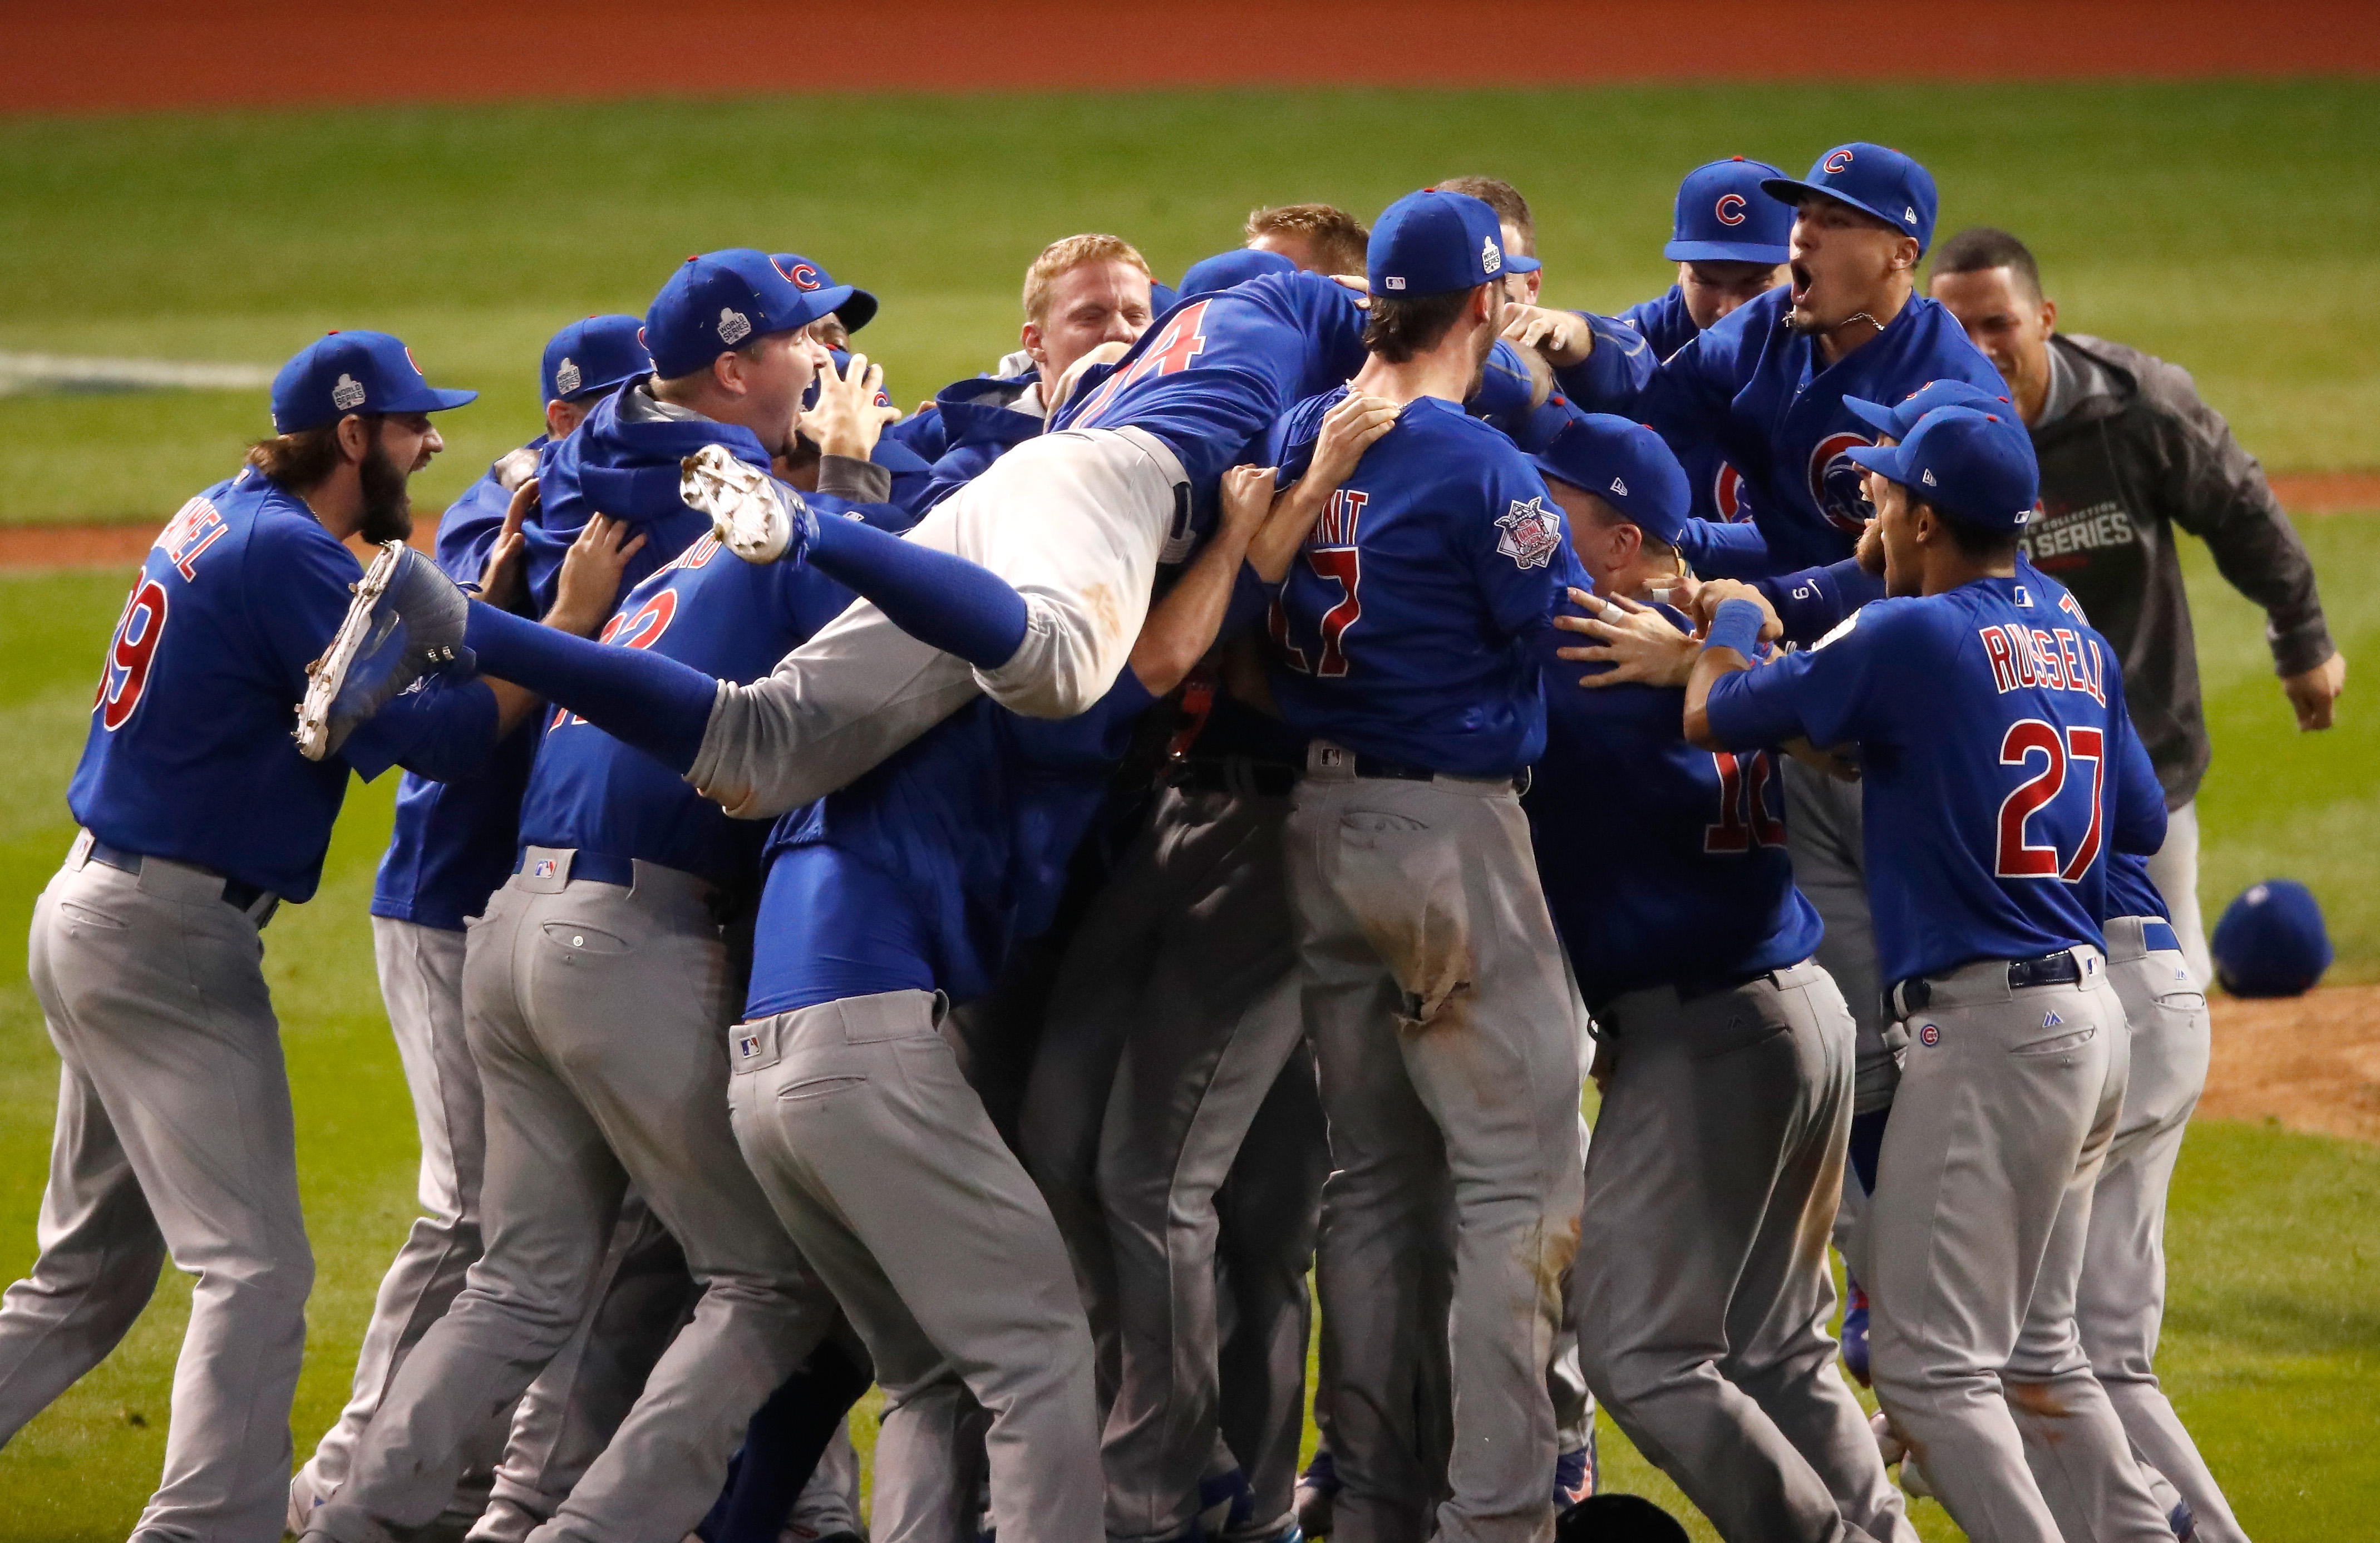 Cubs Win World Series For First Time Since 1908